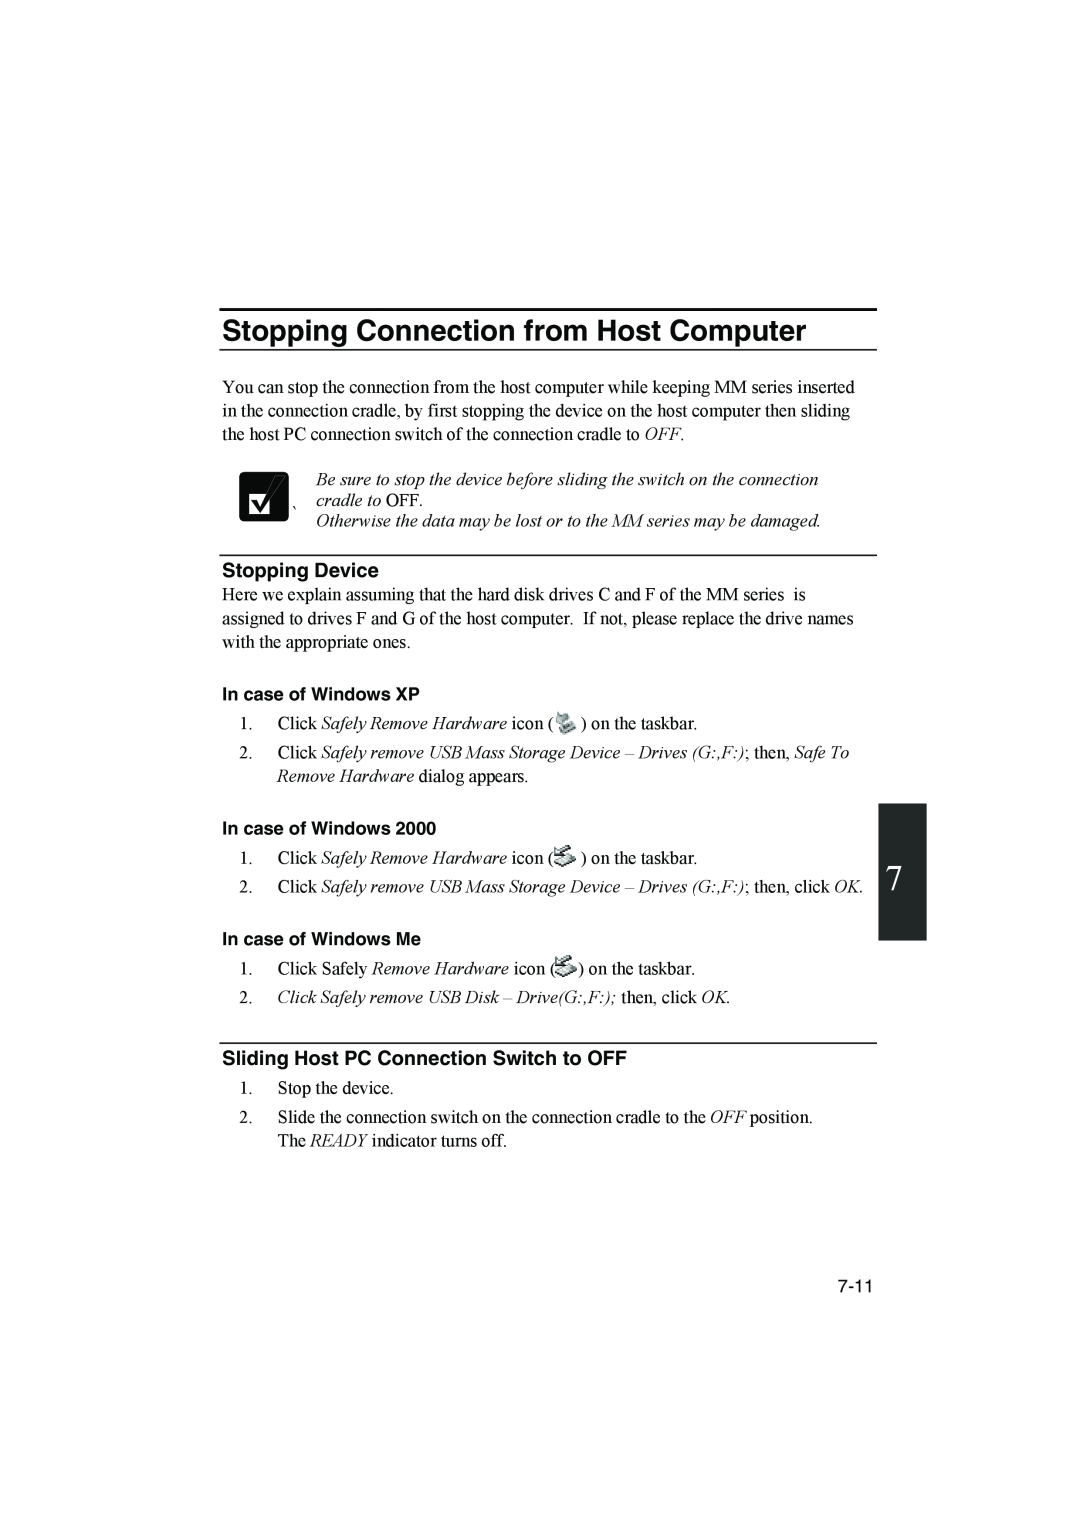 Sharp PC-MM1 manual Stopping Connection from Host Computer, Stopping Device, Sliding Host PC Connection Switch to OFF 